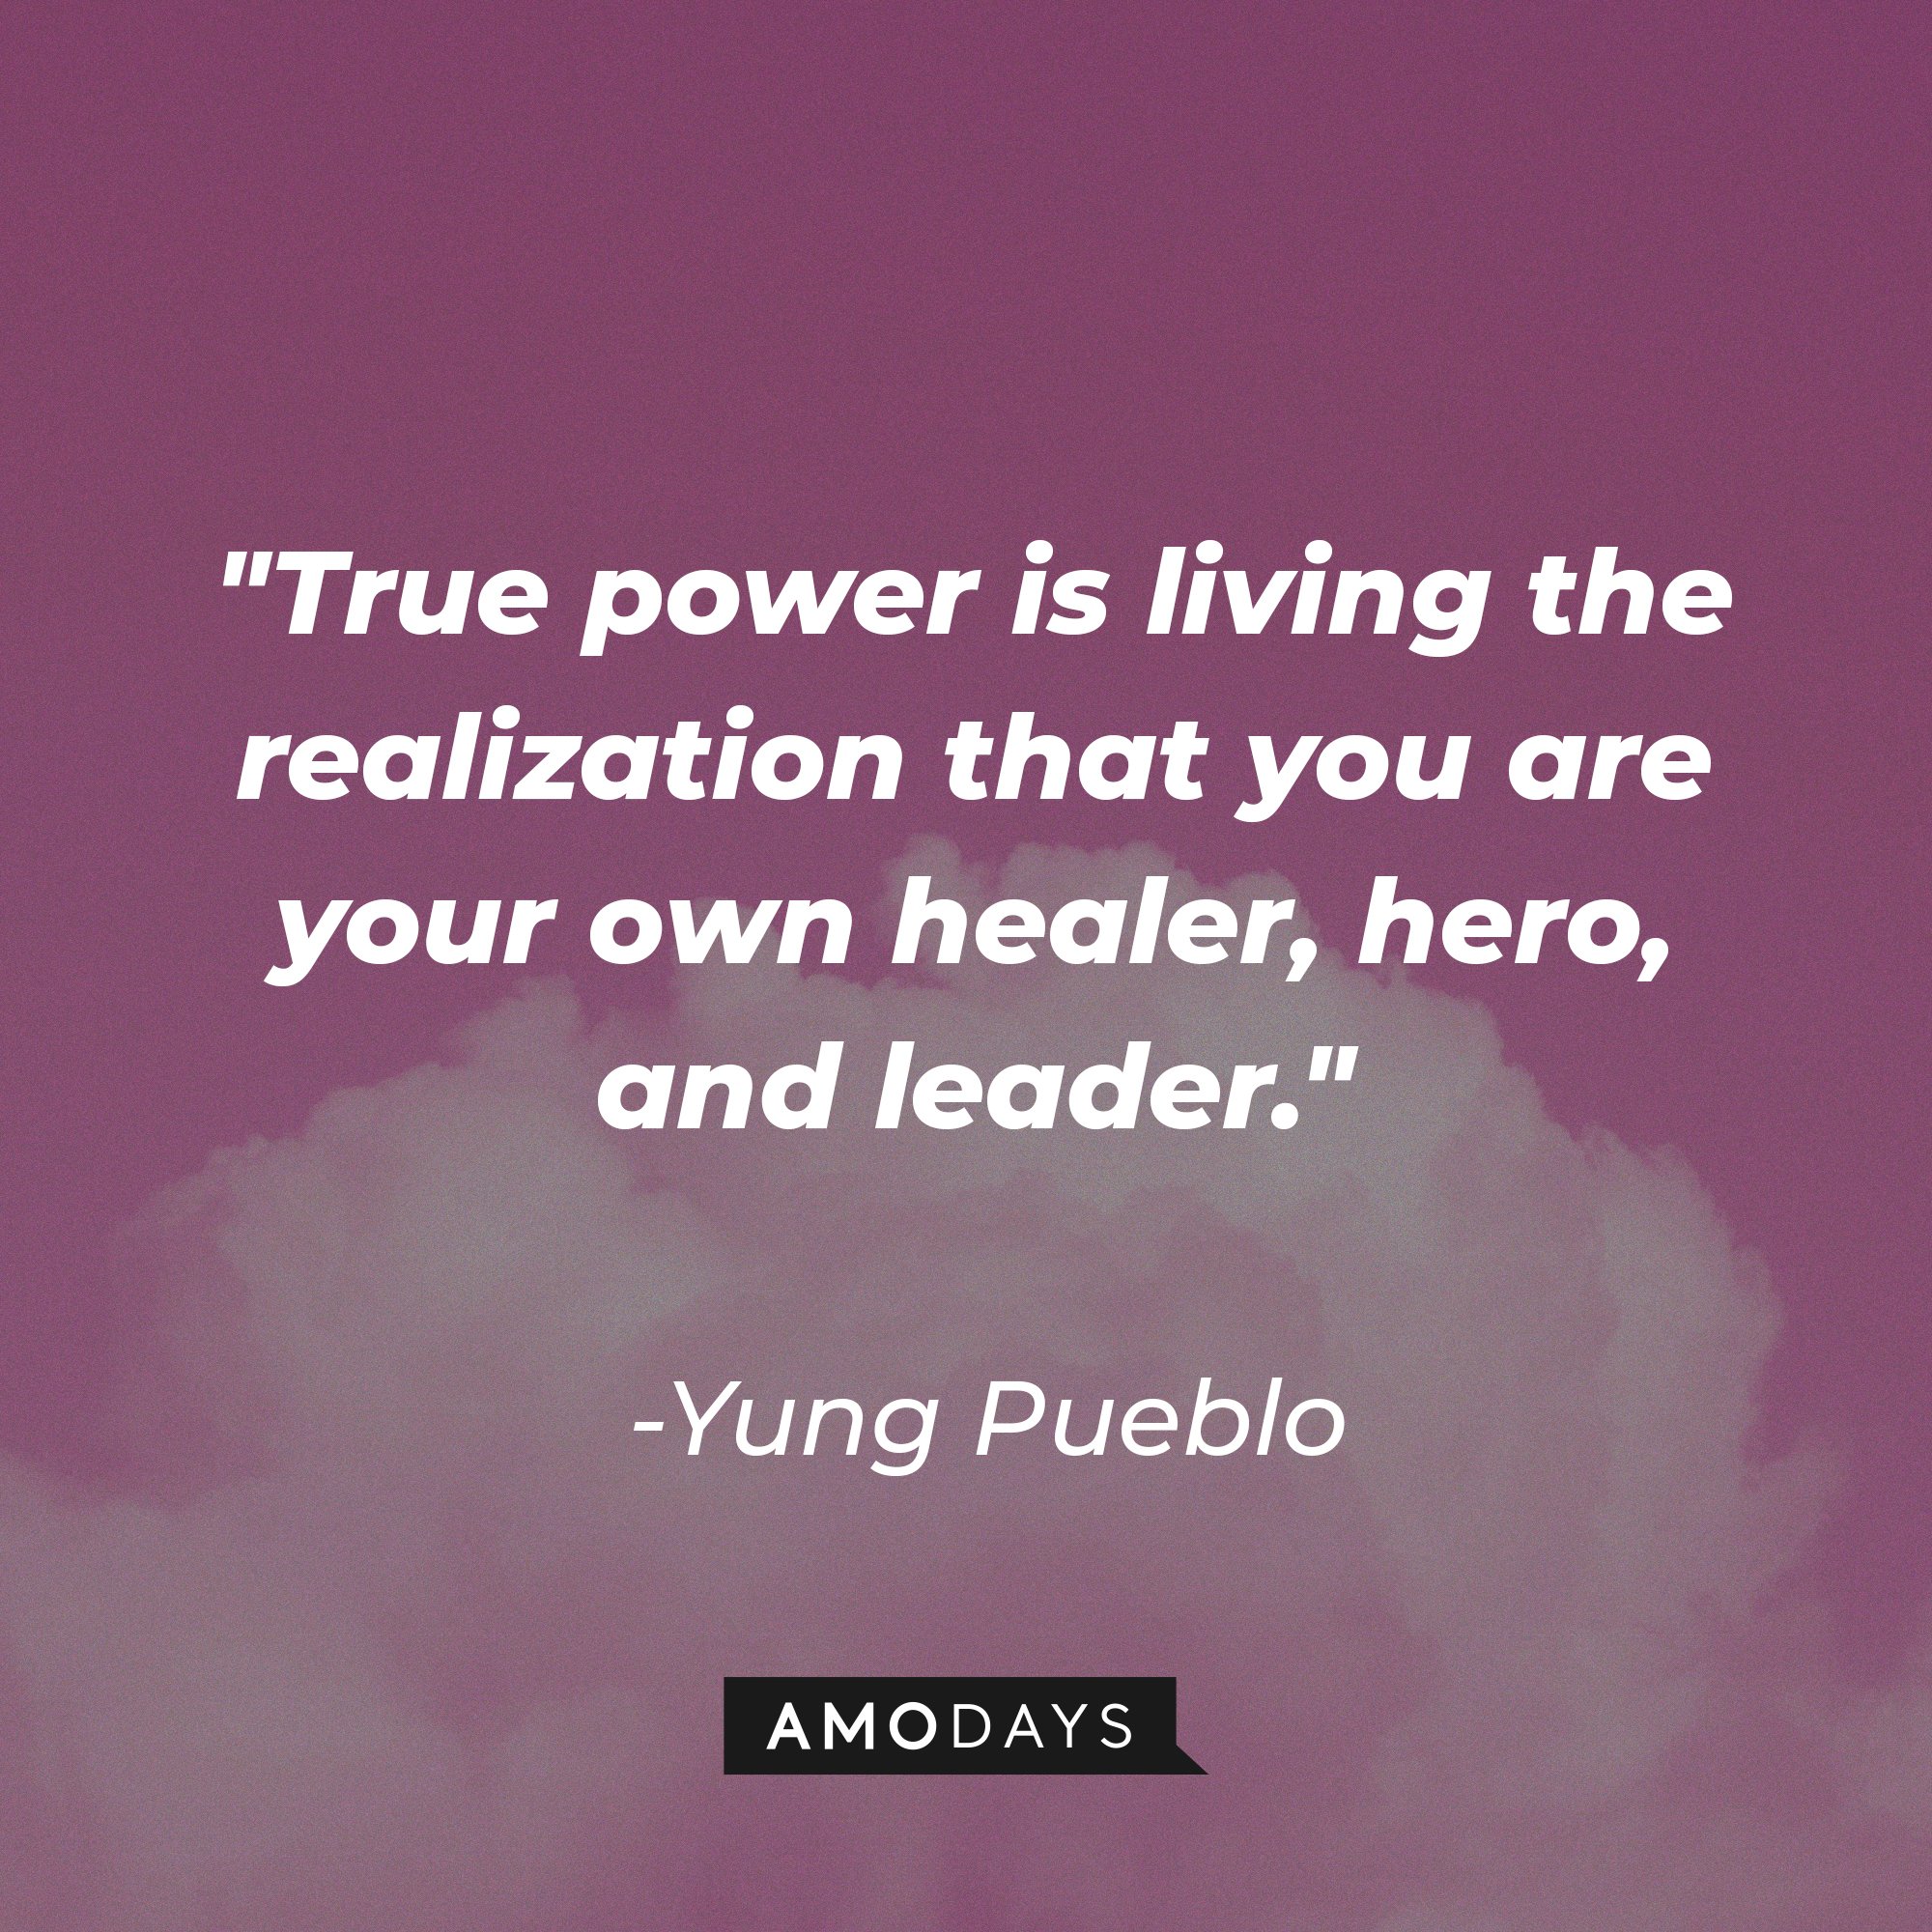 Yung Pueblo's quote "True power is living the realization that you are your own healer, hero, and leader." | Source: Unsplash.com